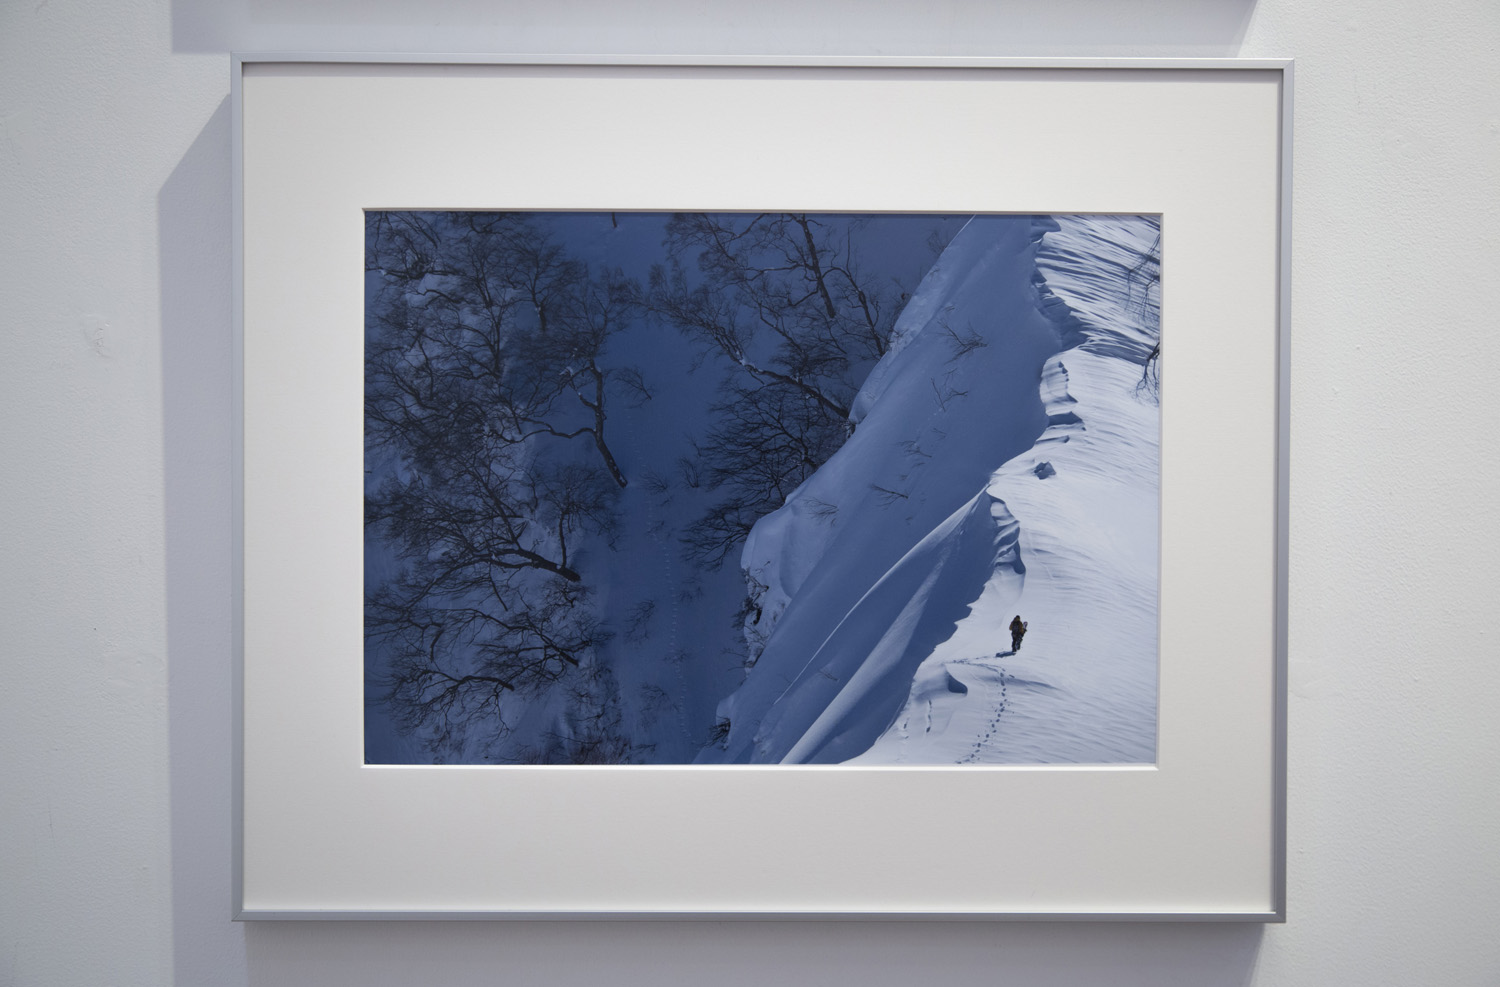 All of the photographs by Mr. Isao Endo show the life of a real snowboarder.